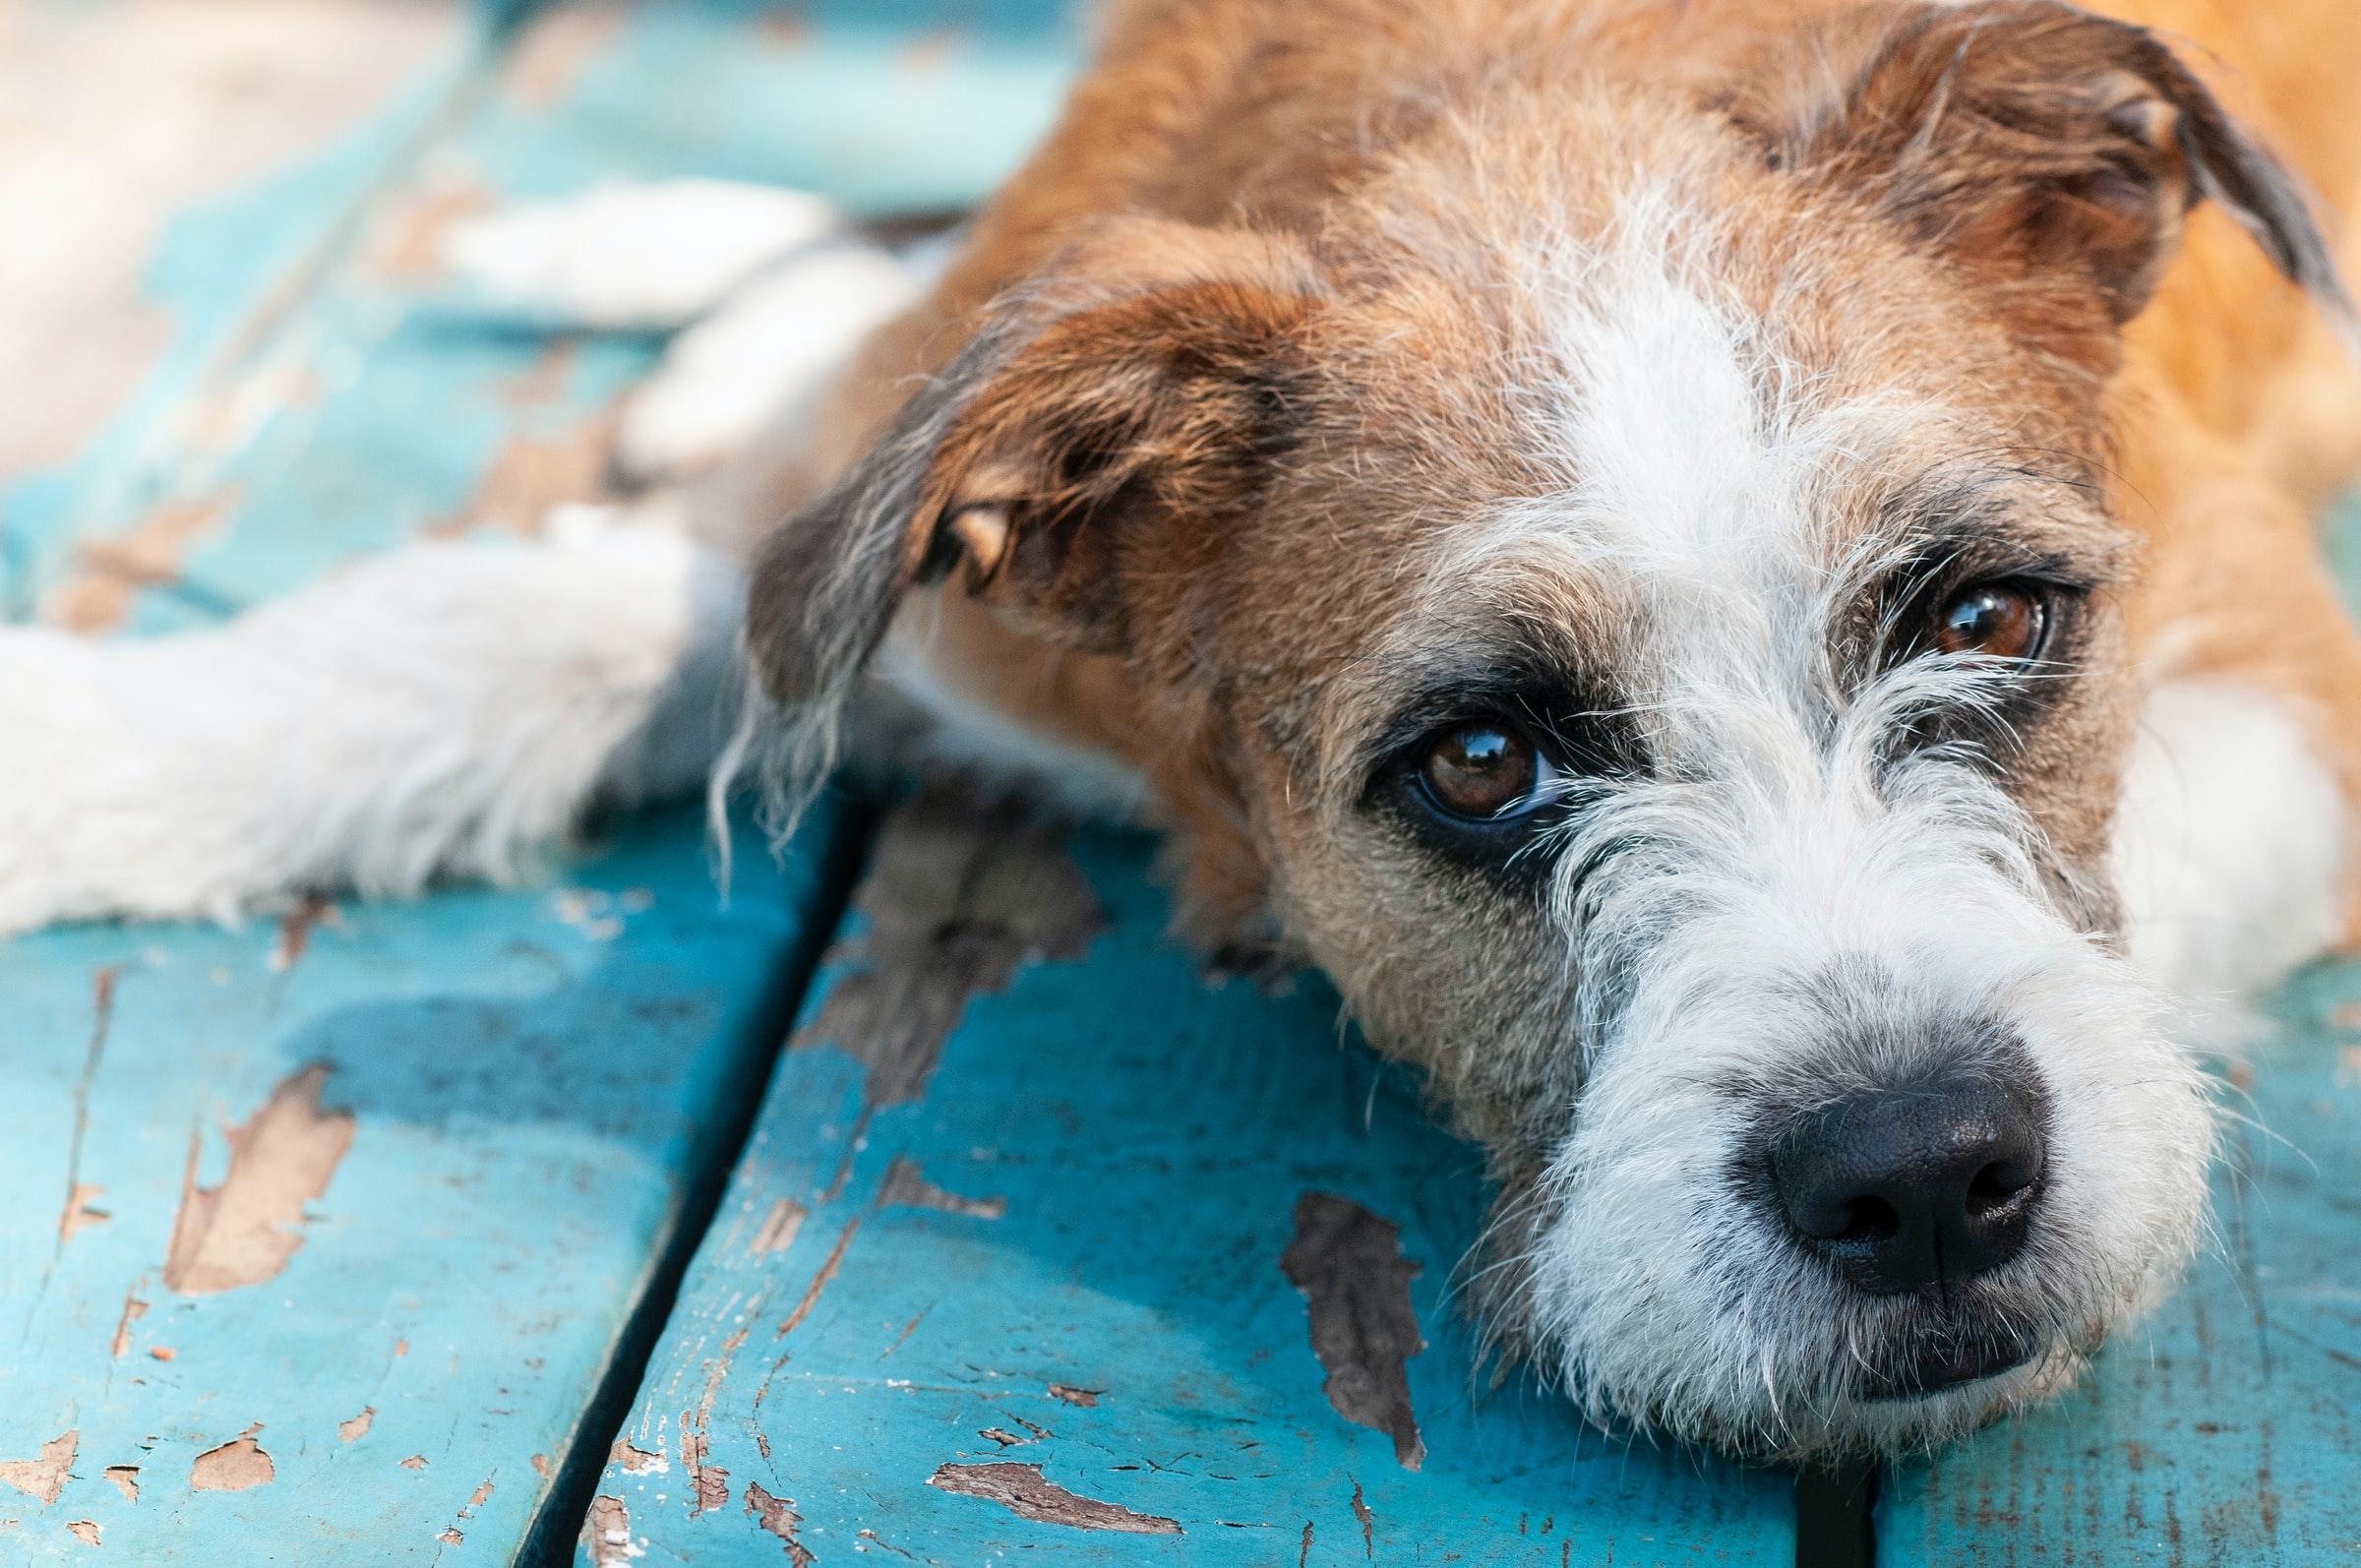 These are the differences between taking home a stray or a rescue.